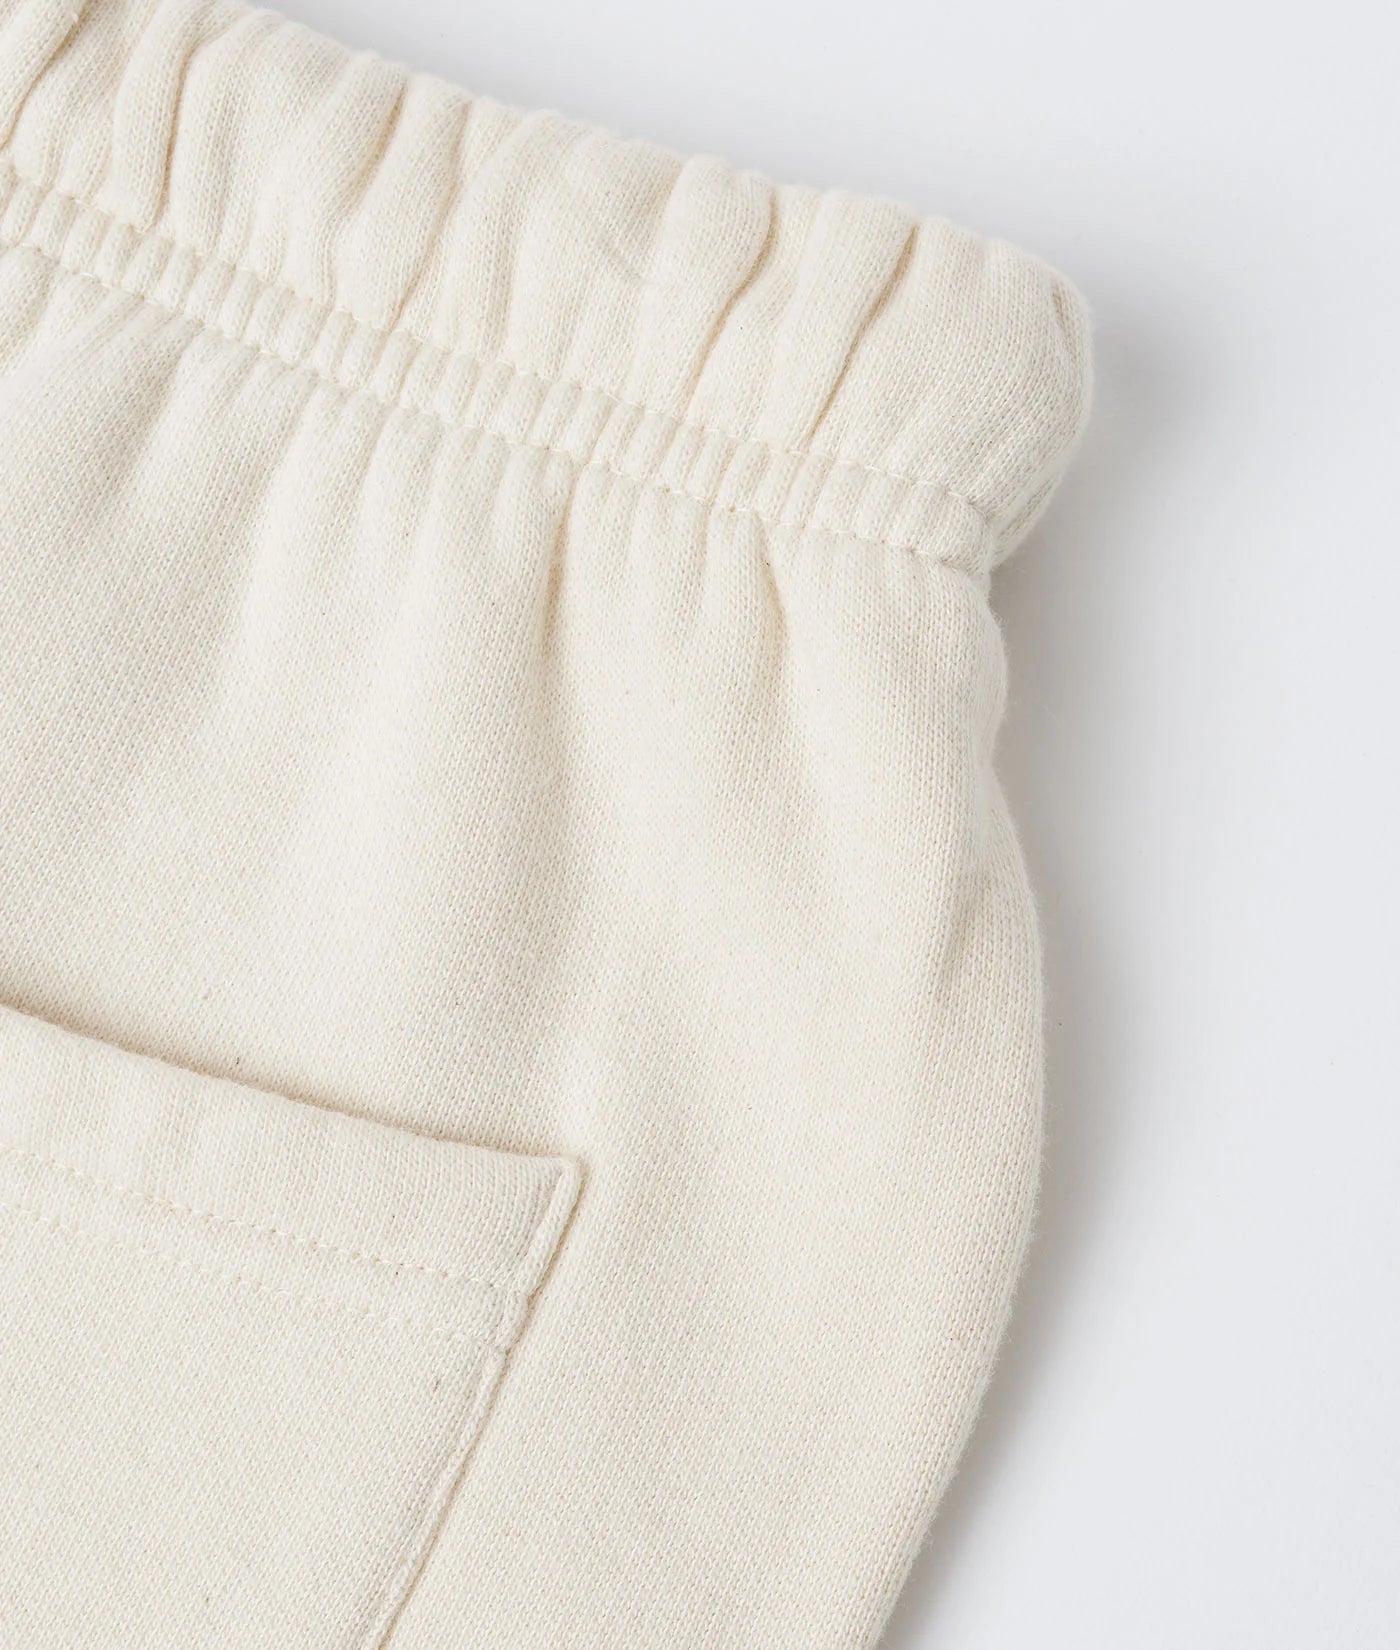 Industry of All Nations Super Sweatpants, Undyed